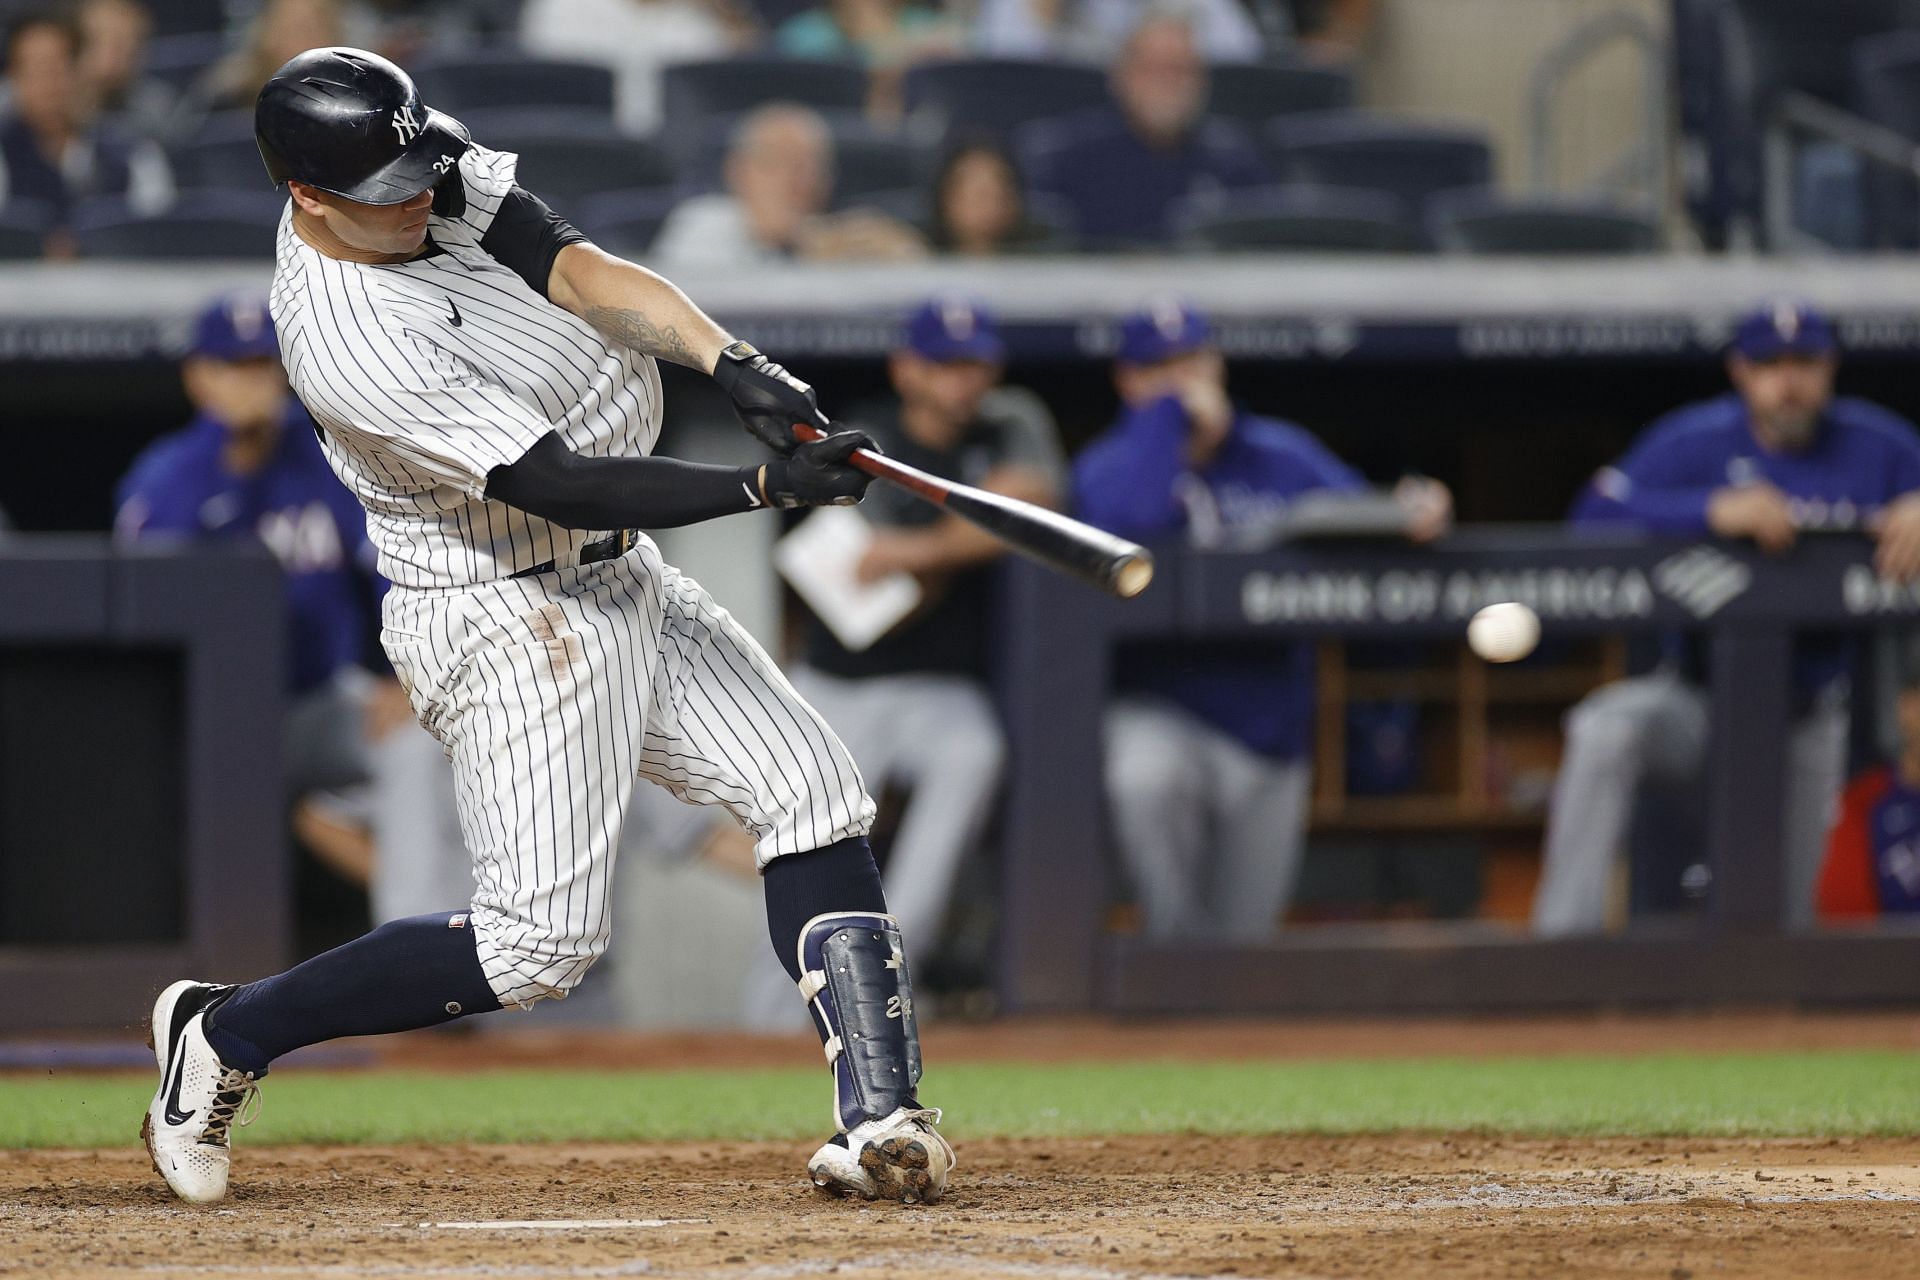 Gary Sanchez headed to the Minnesota Twins from the Yankees